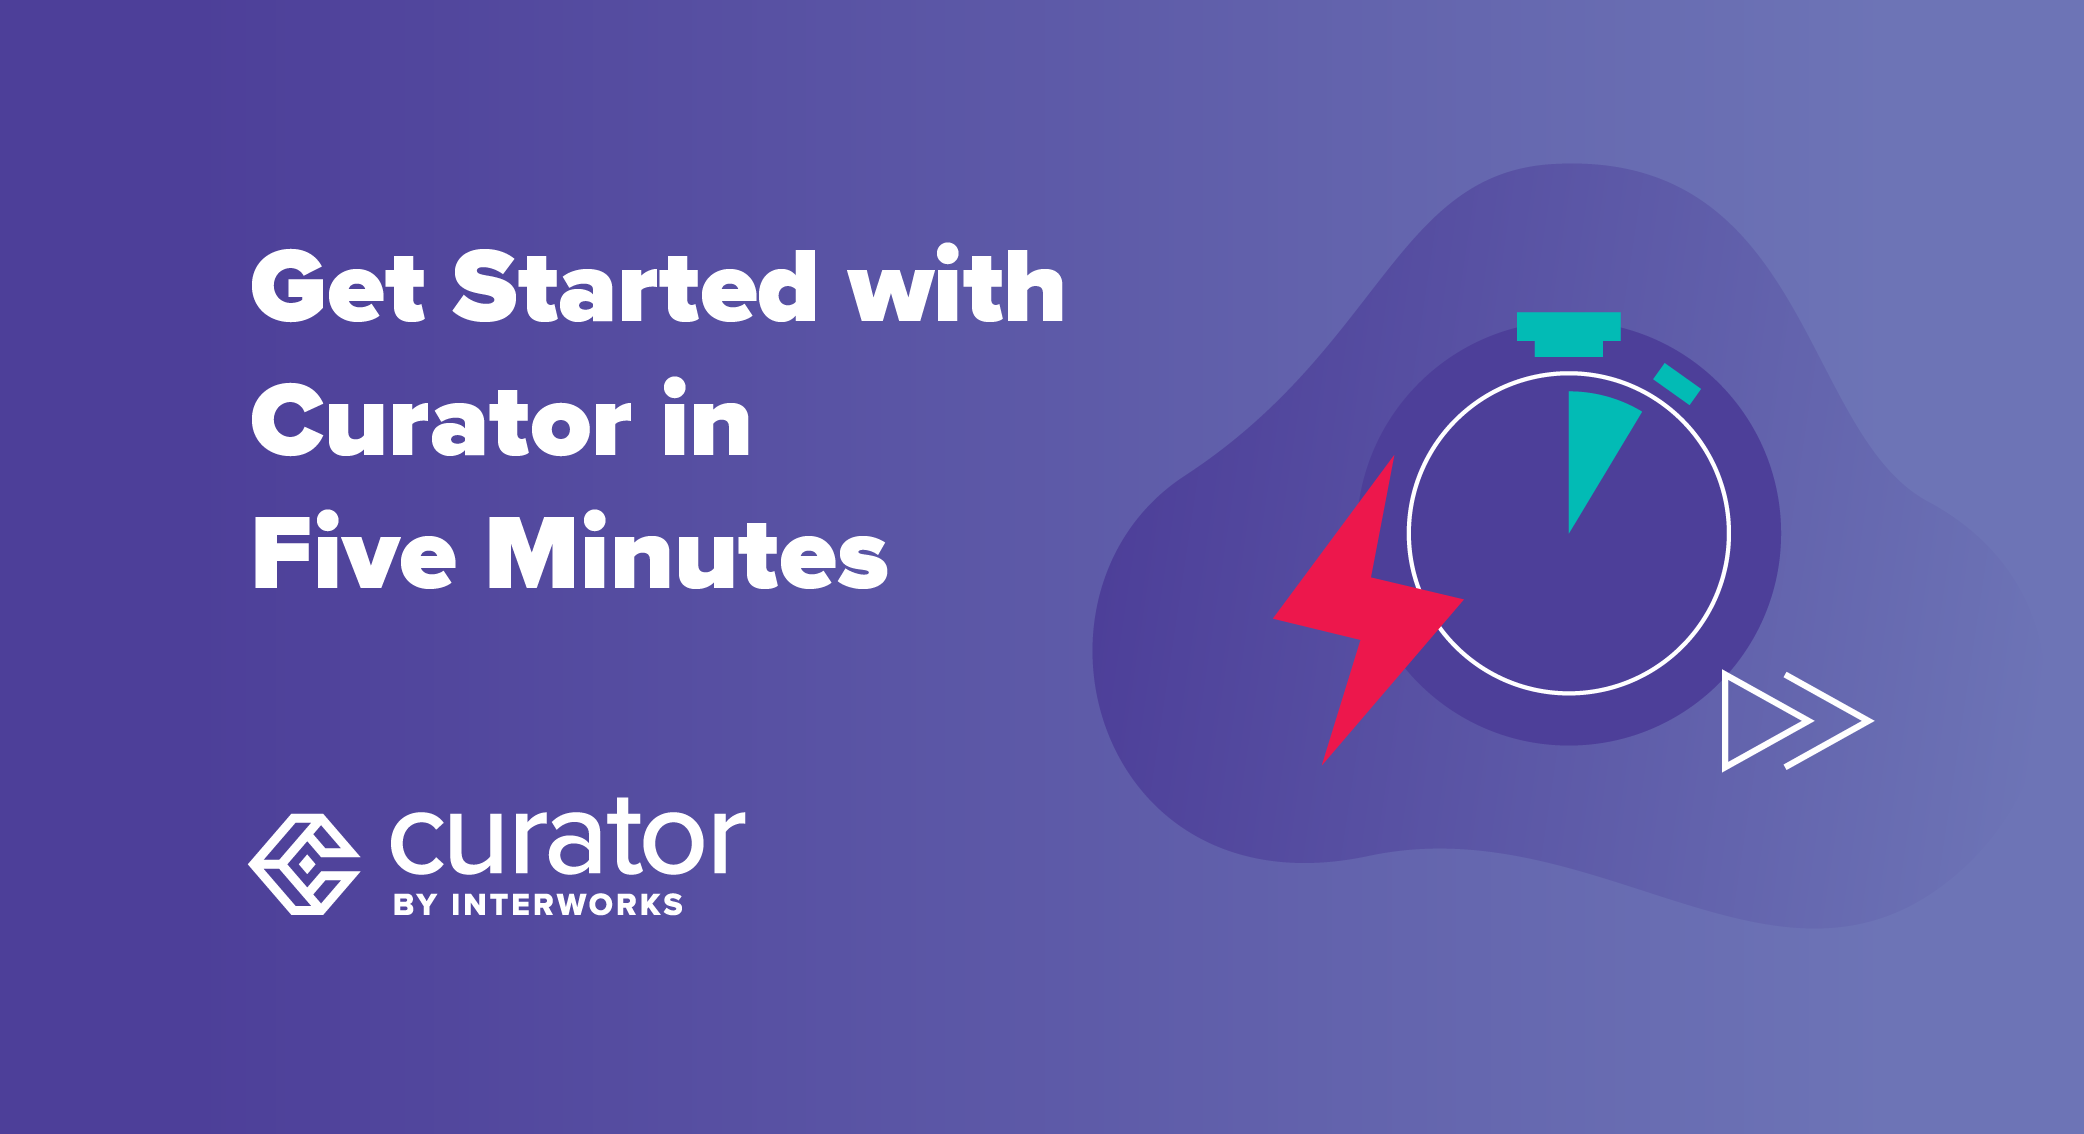 page thumbnail: Get Started with Curator in Five Minutes